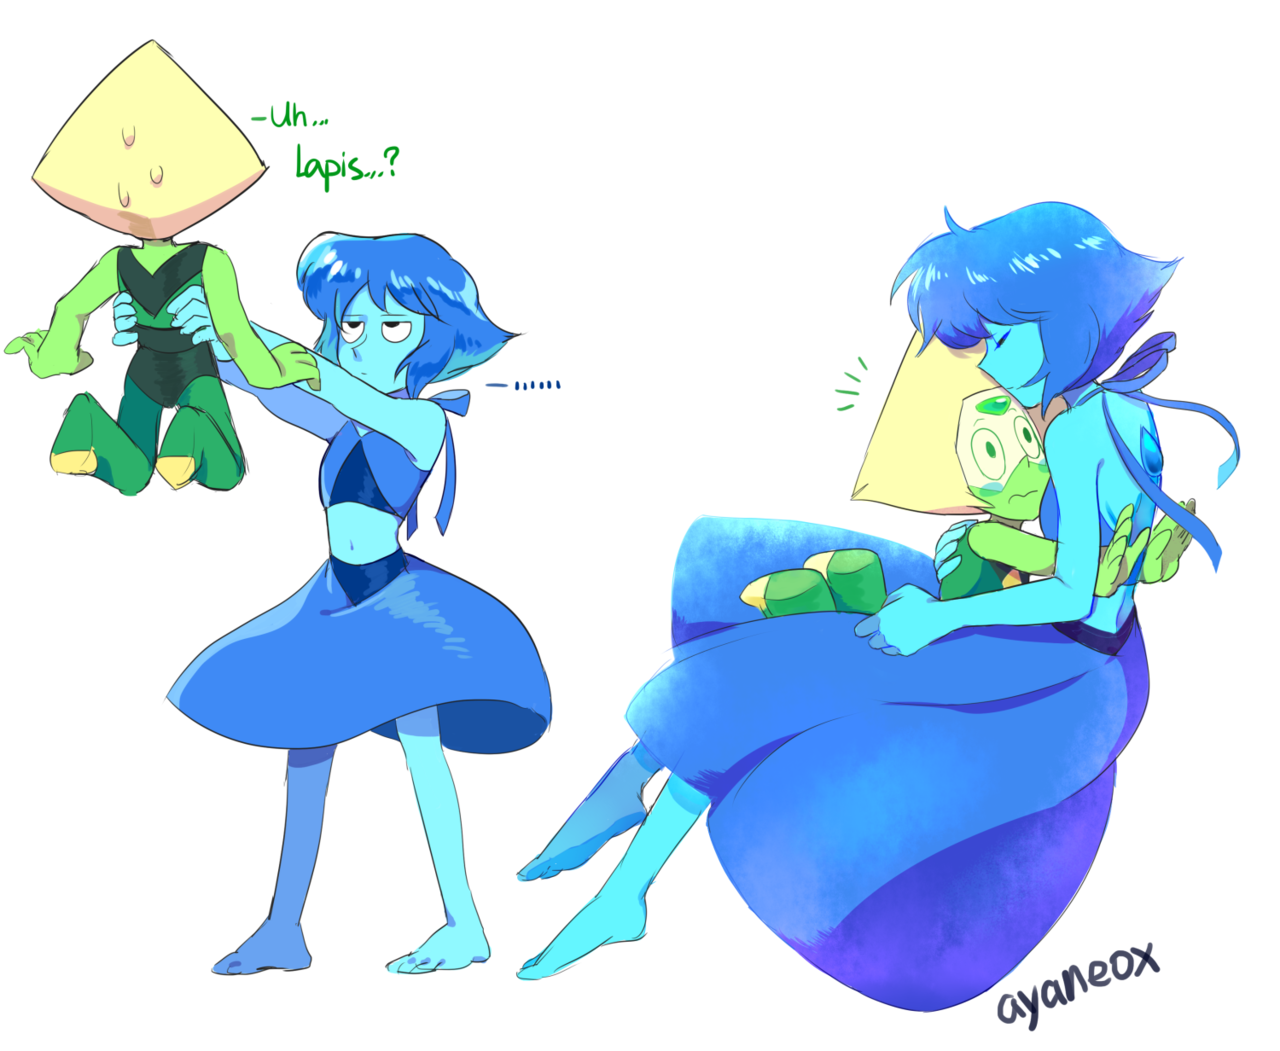 Lapidot is so sweeeeet!!! Both of them are adorable…